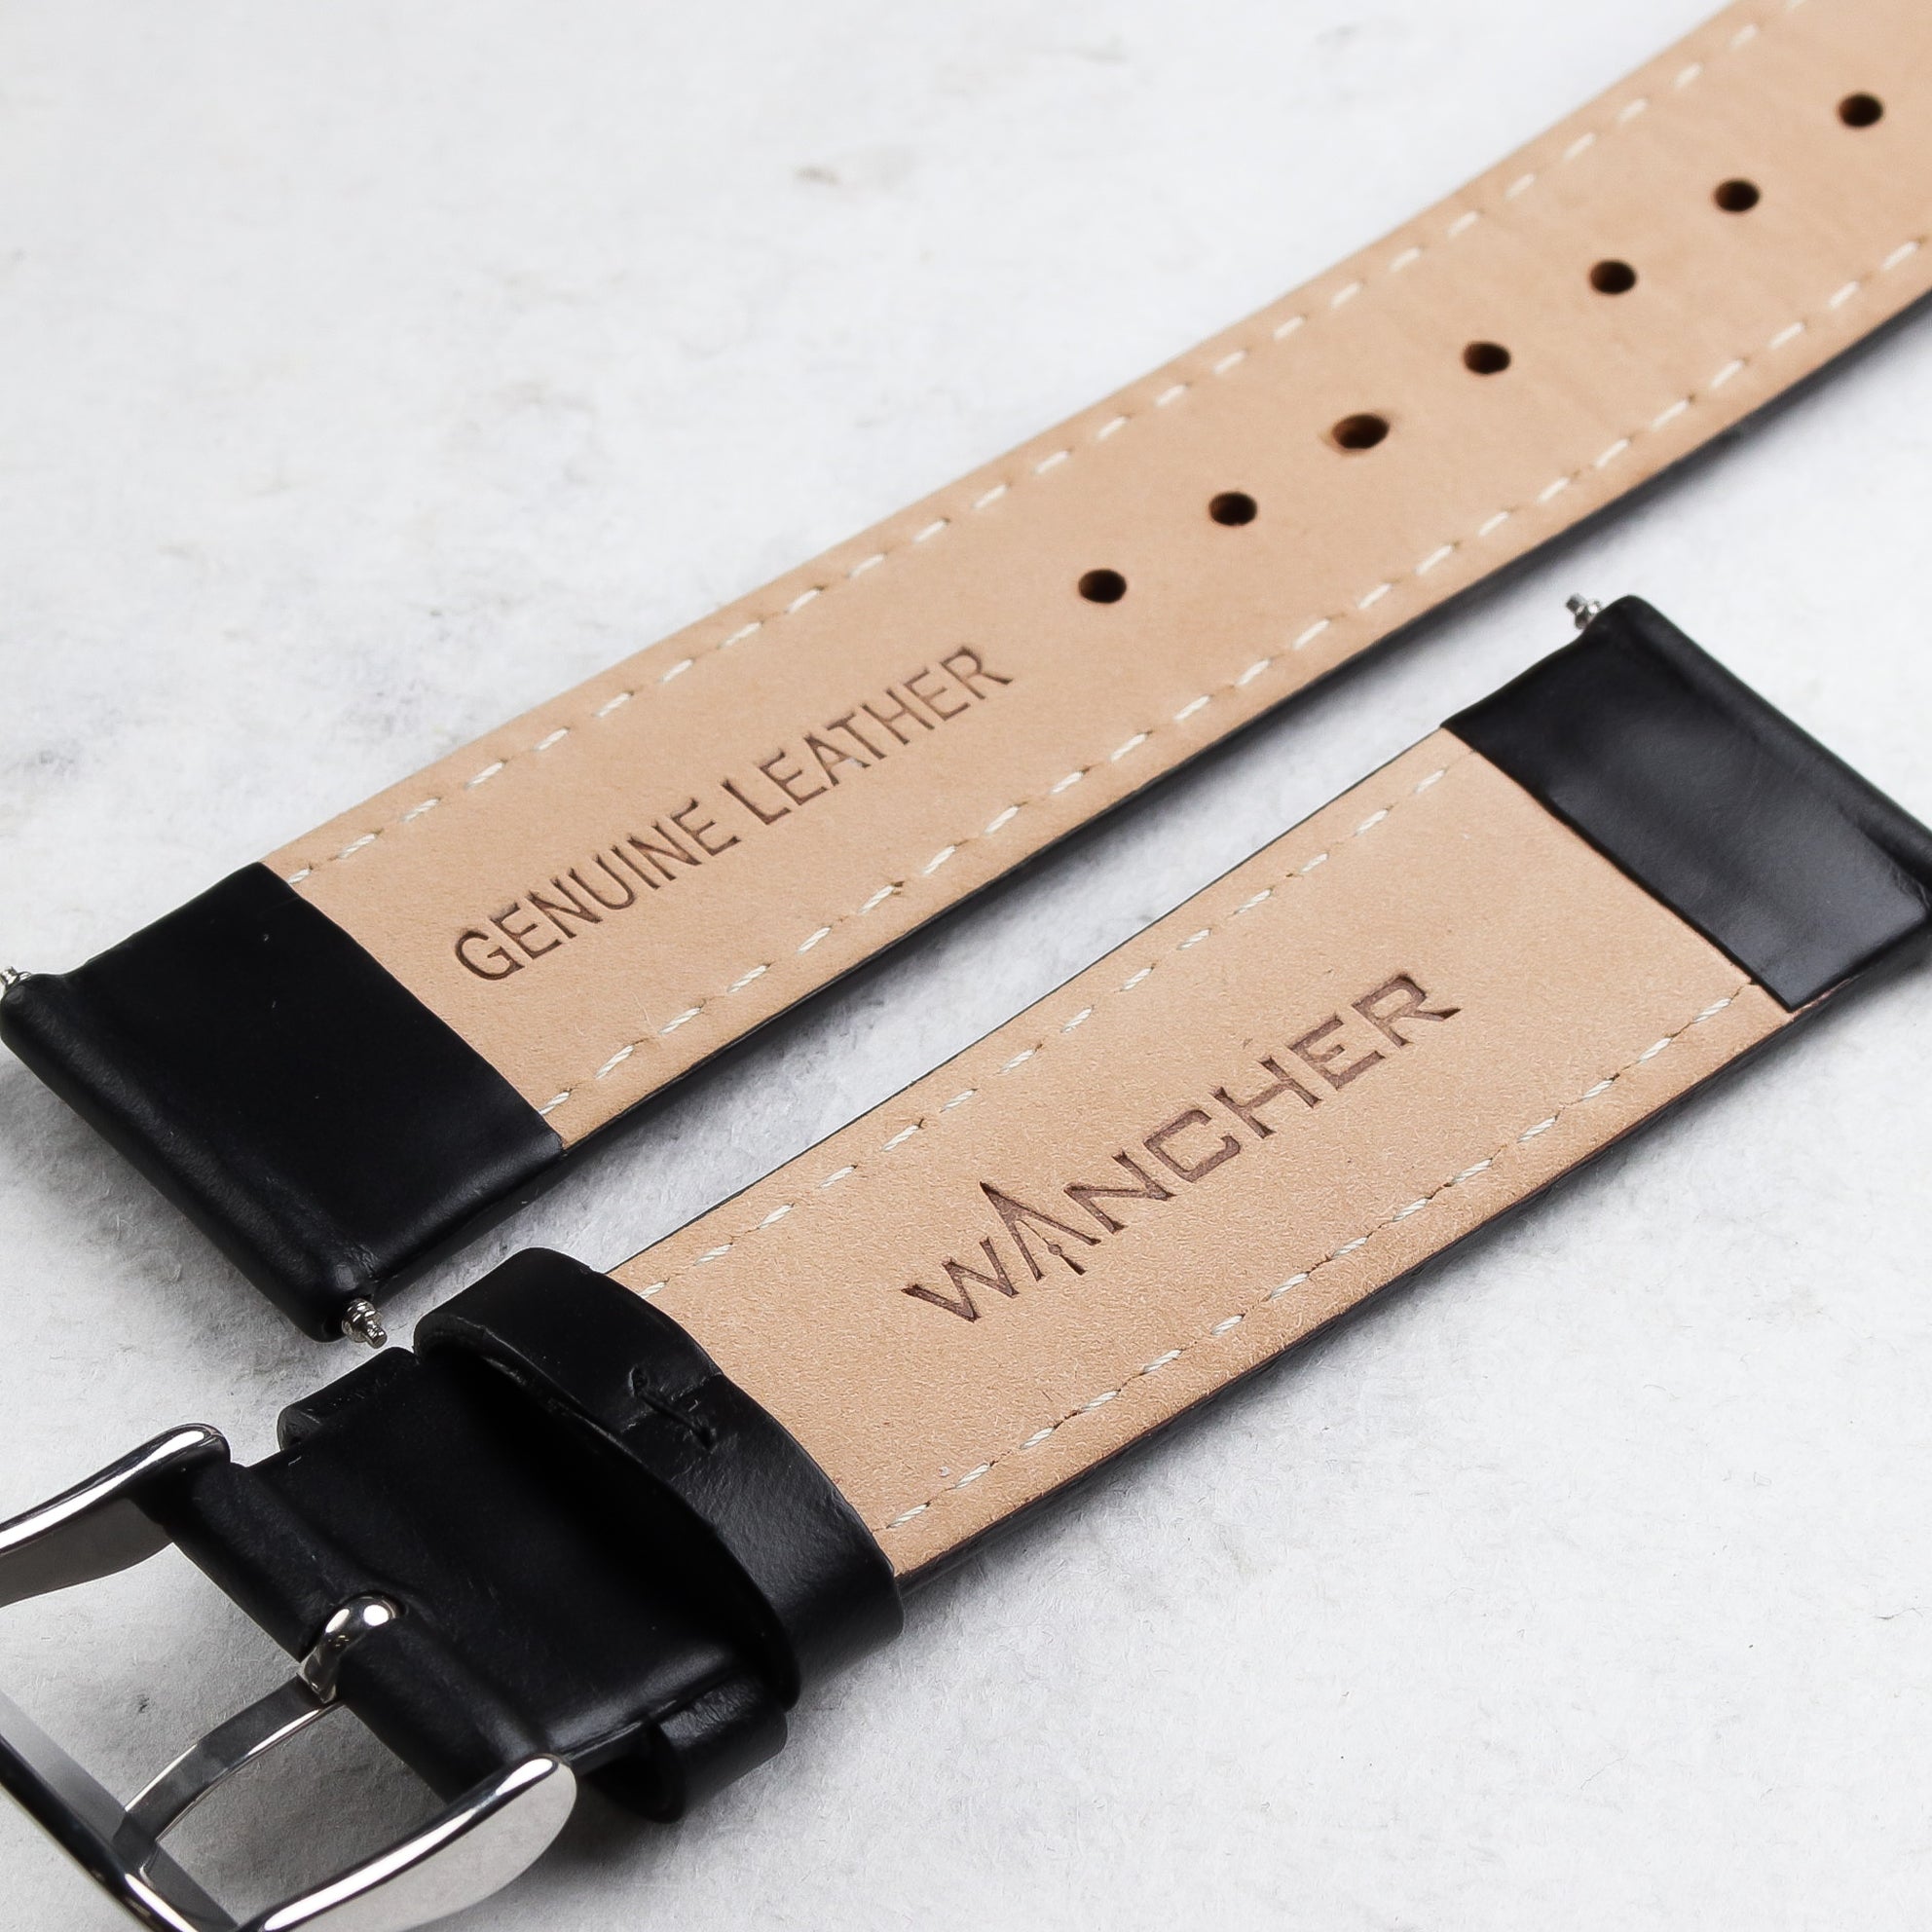 Calfskin Leather Strap - Wancher Watch Wancher Watch Wancher Watch Calfskin Leather Strap {{ Automatic Watch {{ Watch }} }} {{ Japan }}Wancher 20mm Calfskin Leather Strap with Silver Clasp and Quick-release pins Closure - premium quality leather strap for watches.